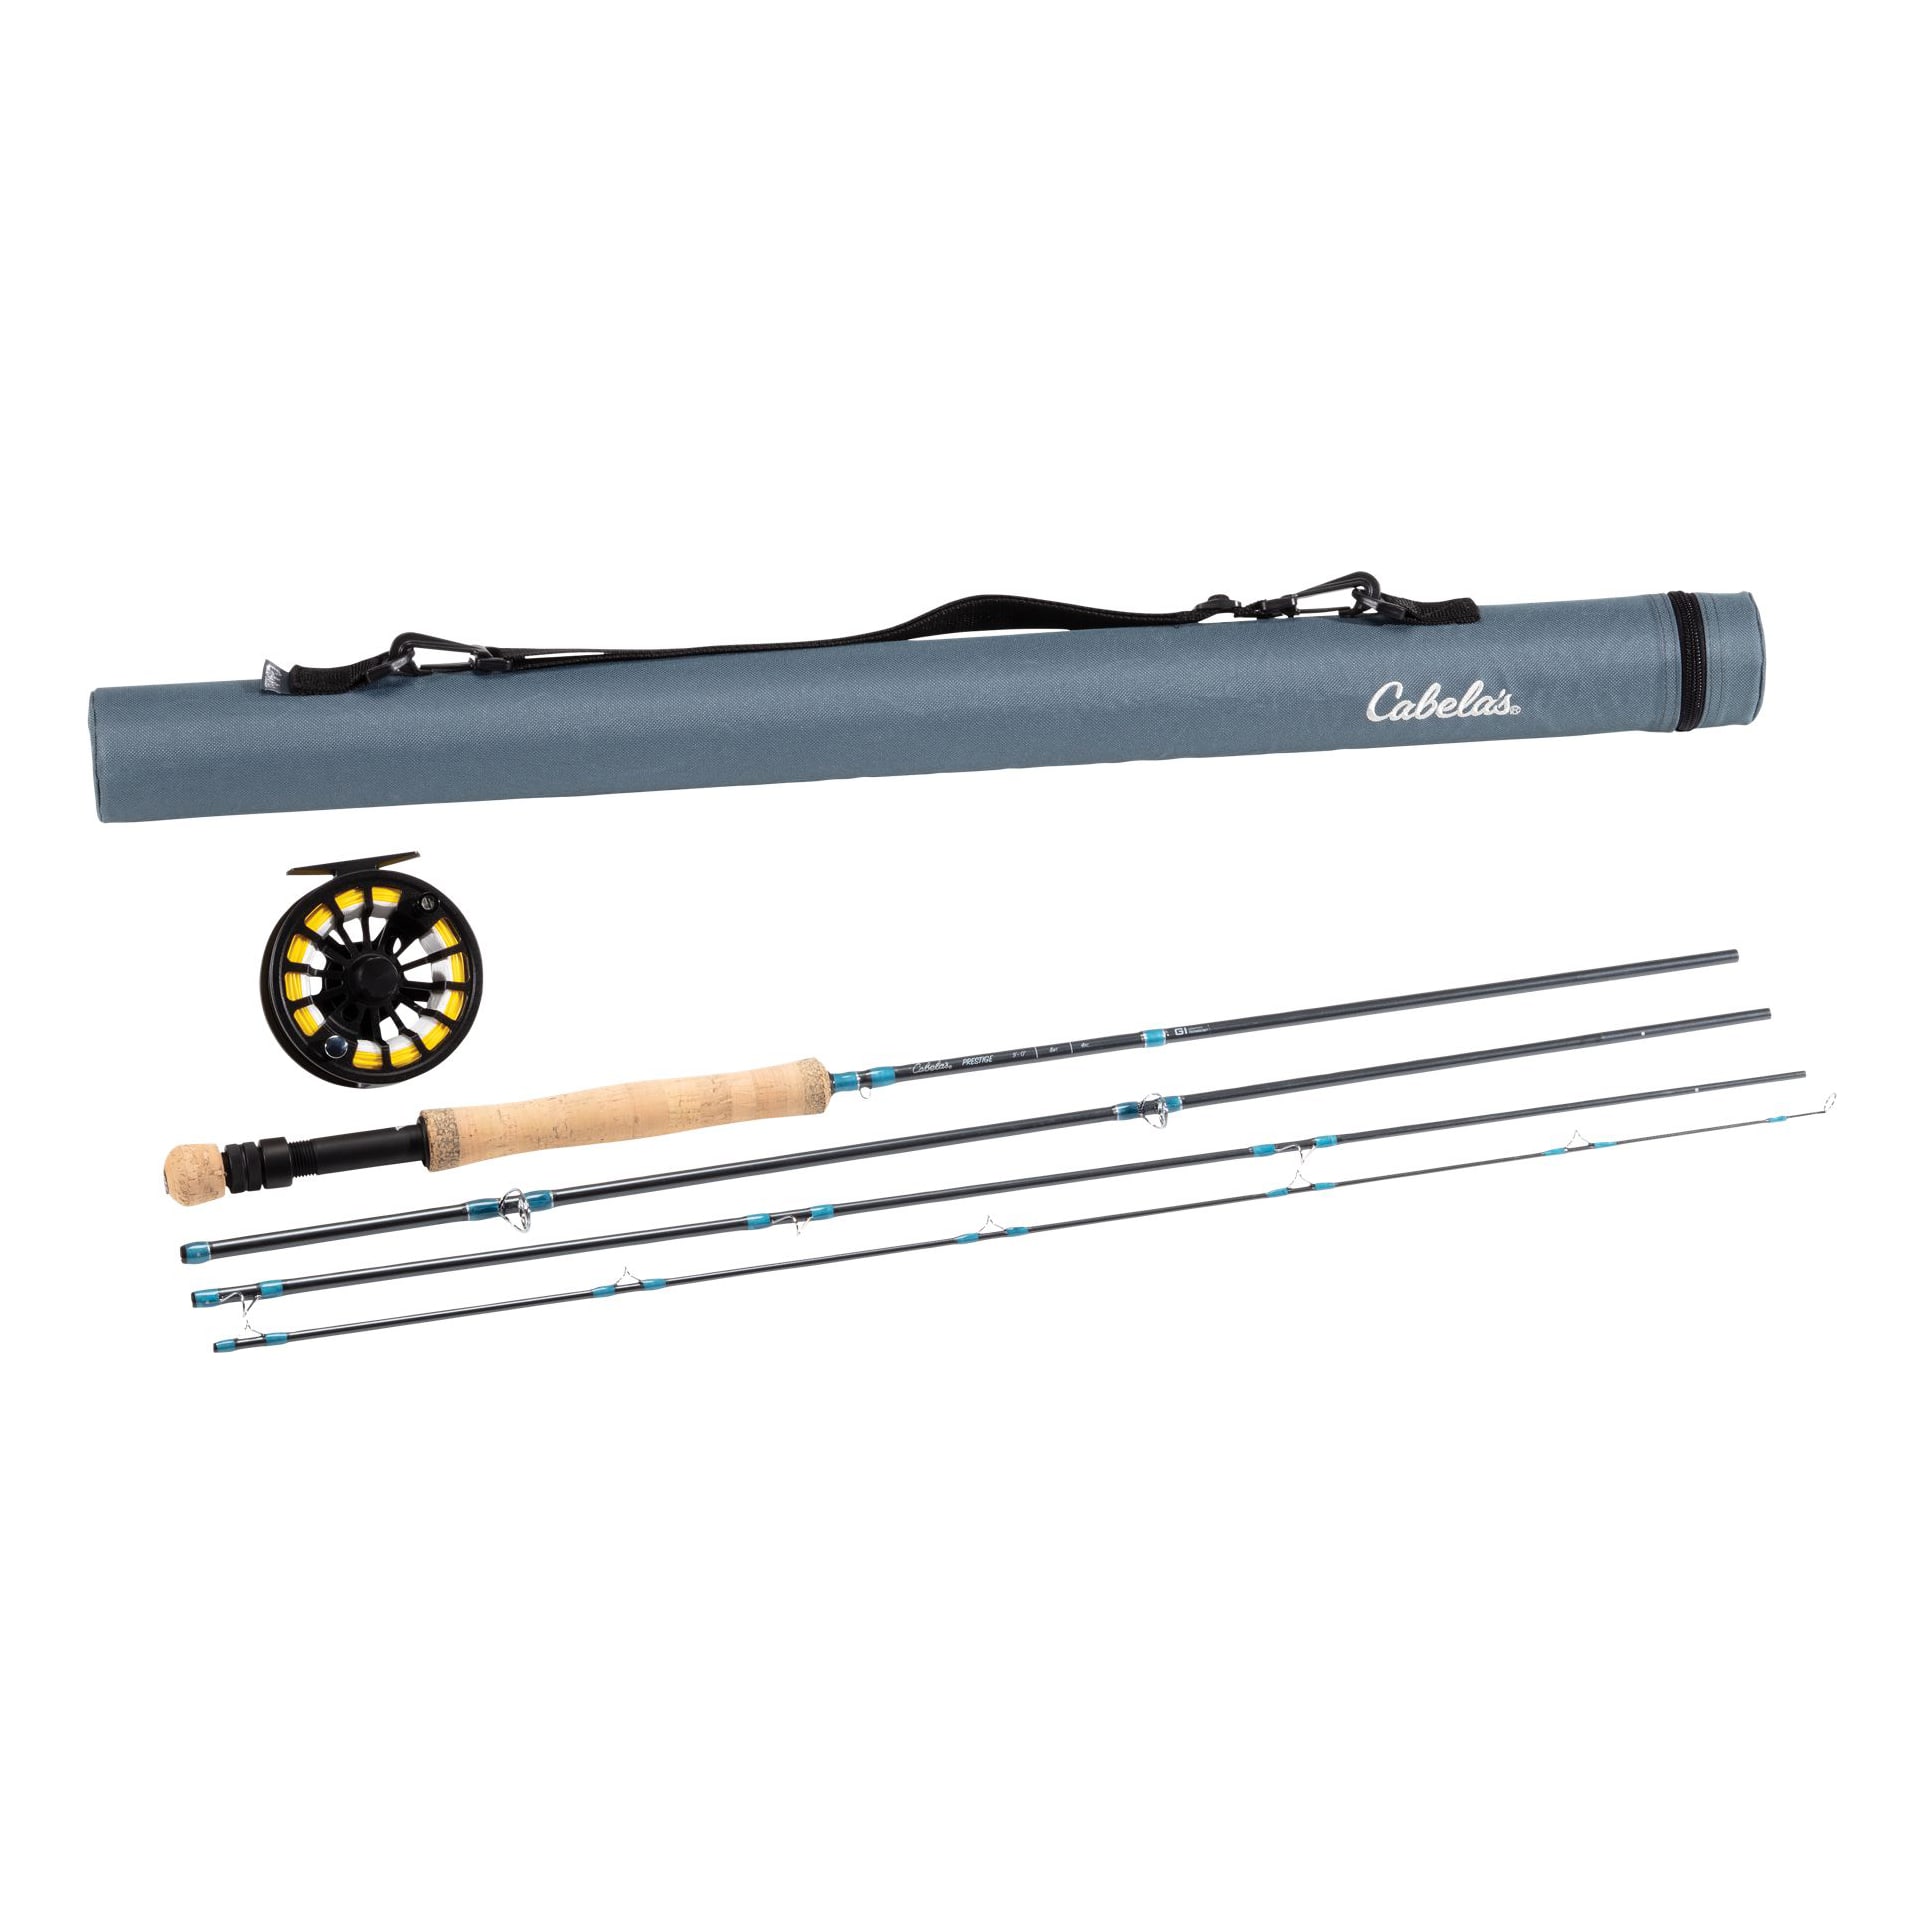 Cabela's Rogue Fly Rod Review - Man Makes Fire